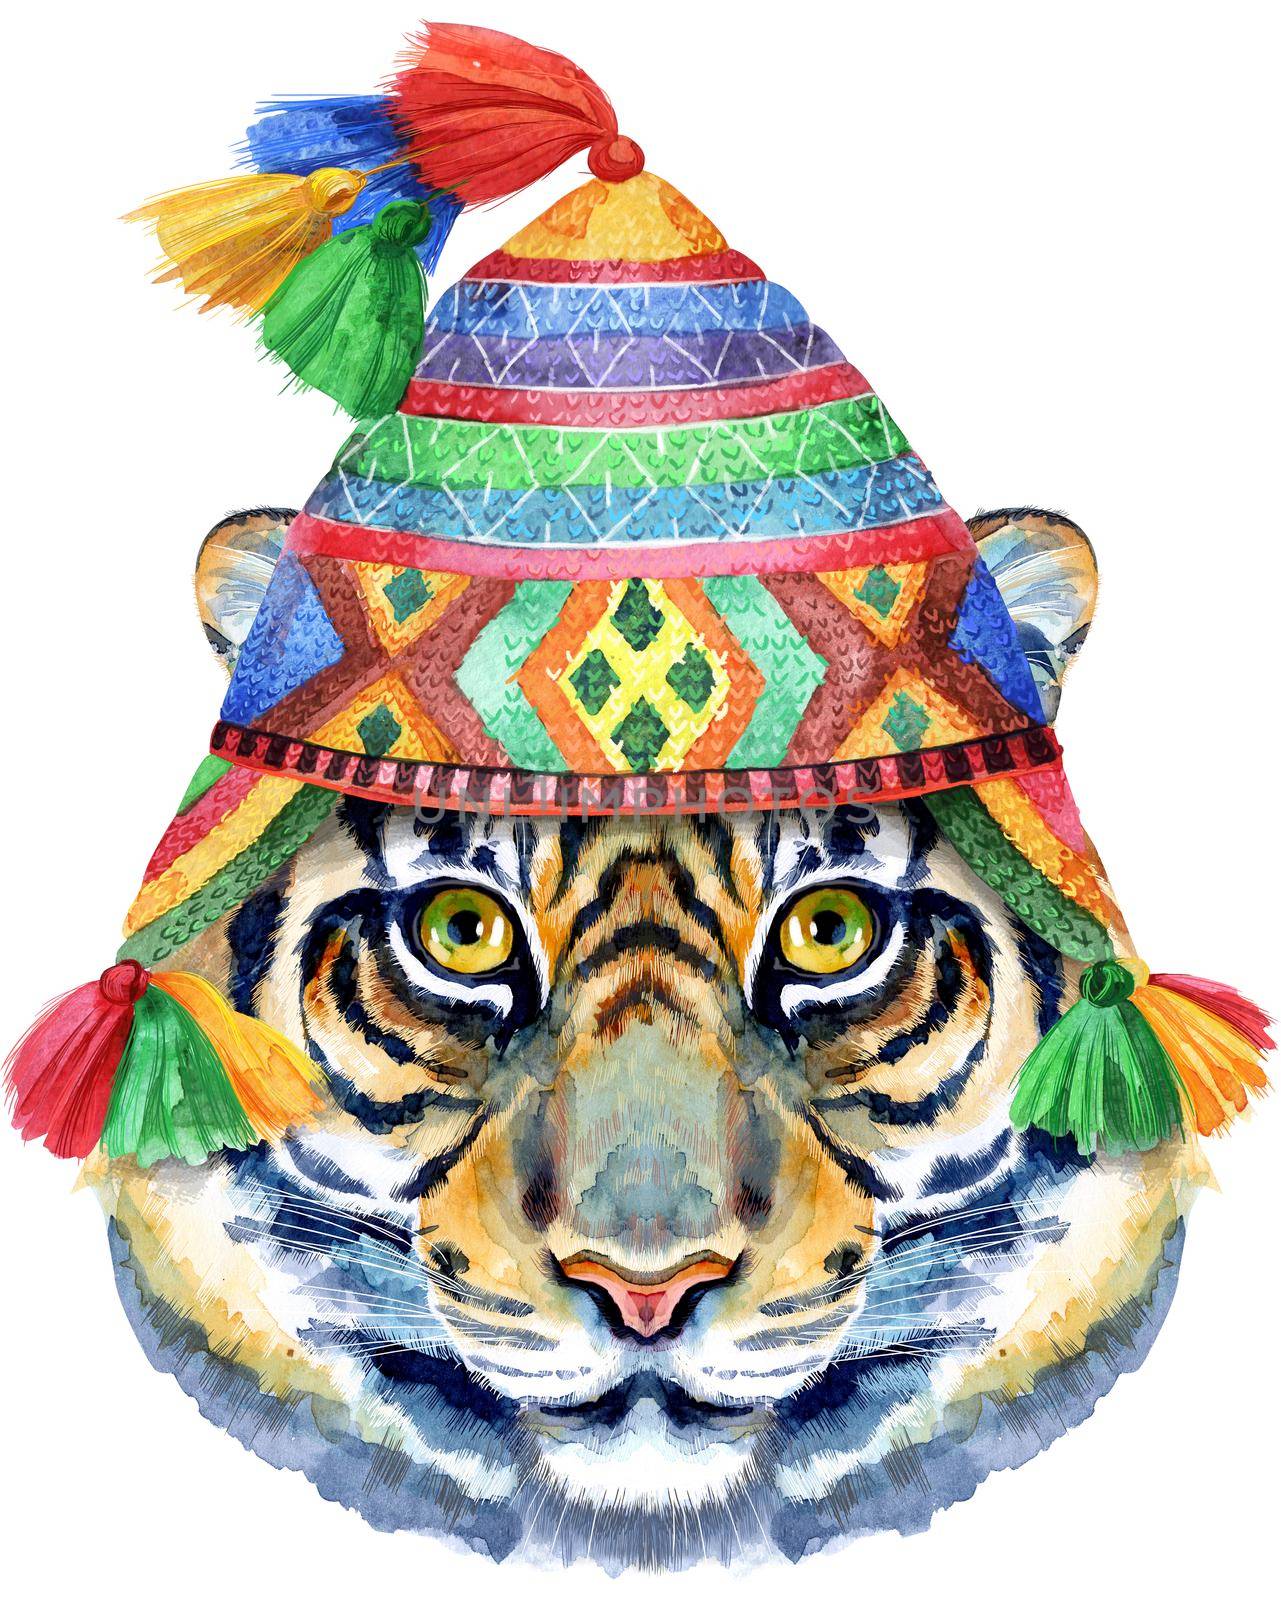 Tiger head in chullo hat. Horoscope character isolated on white background.